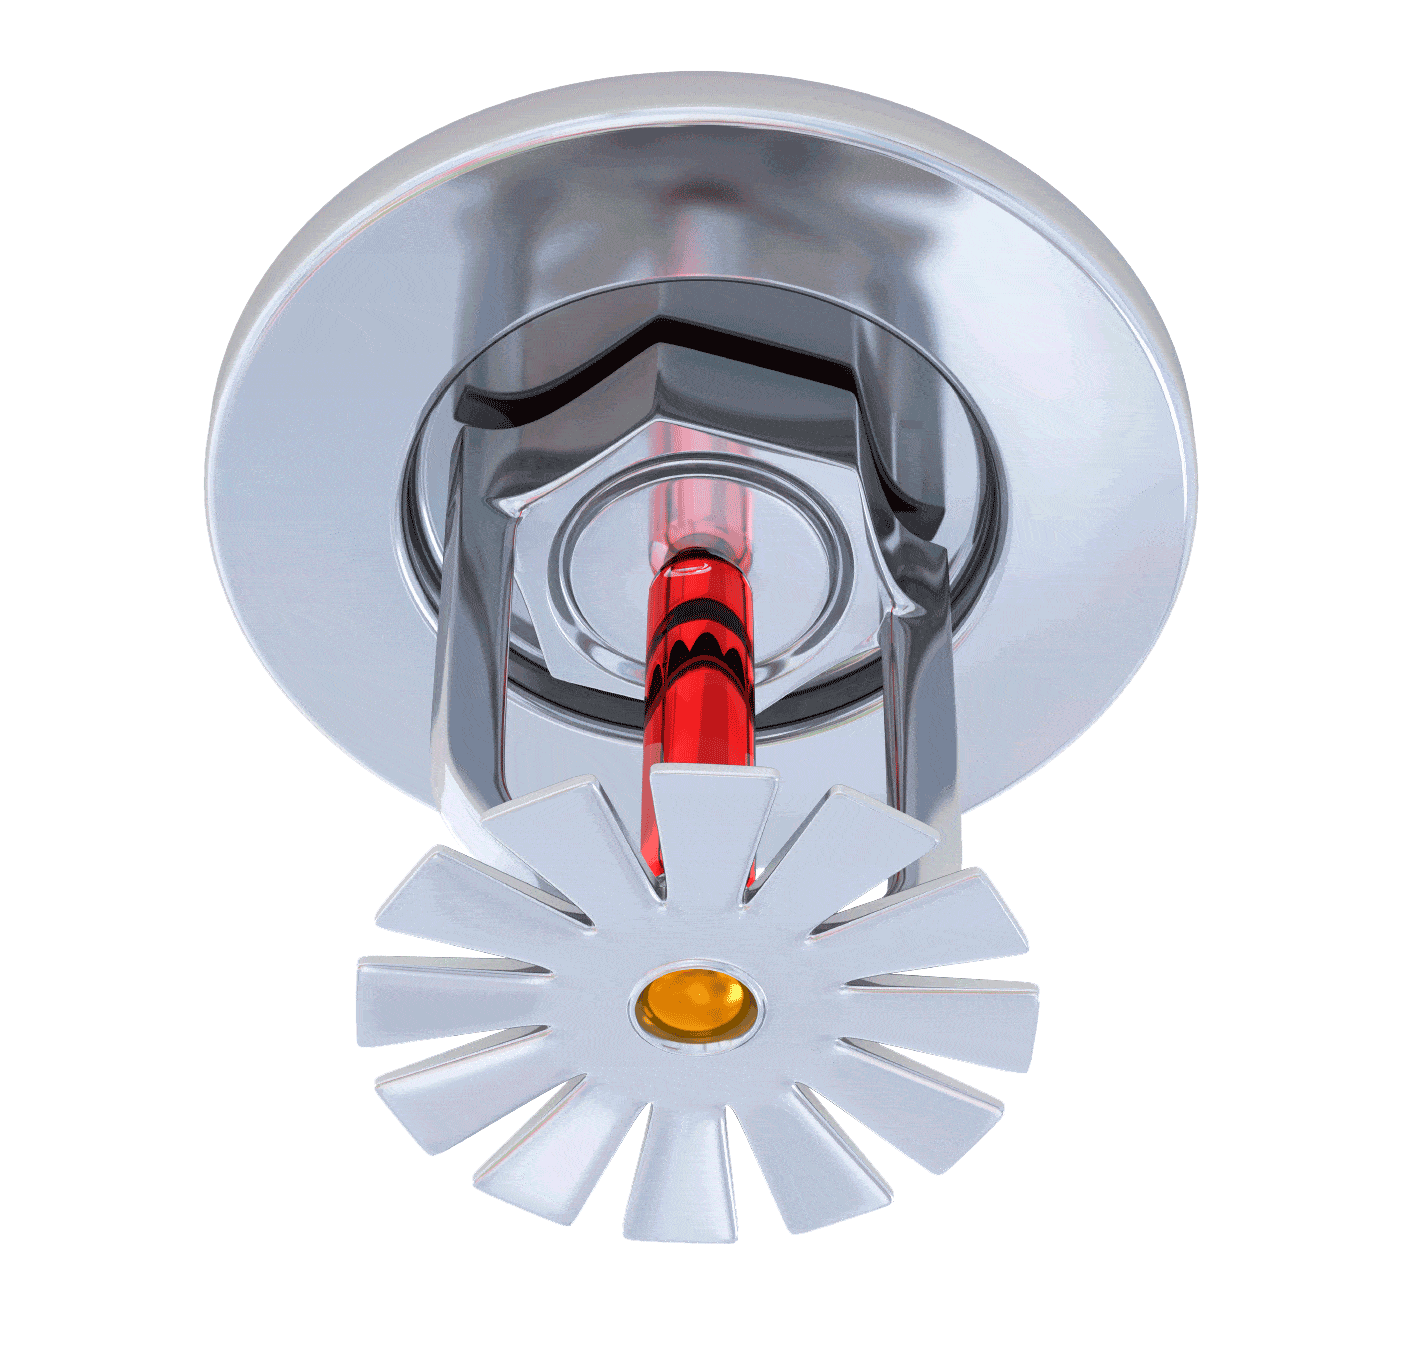 Fire And Spinkler Systems | Security One Alarm Systems